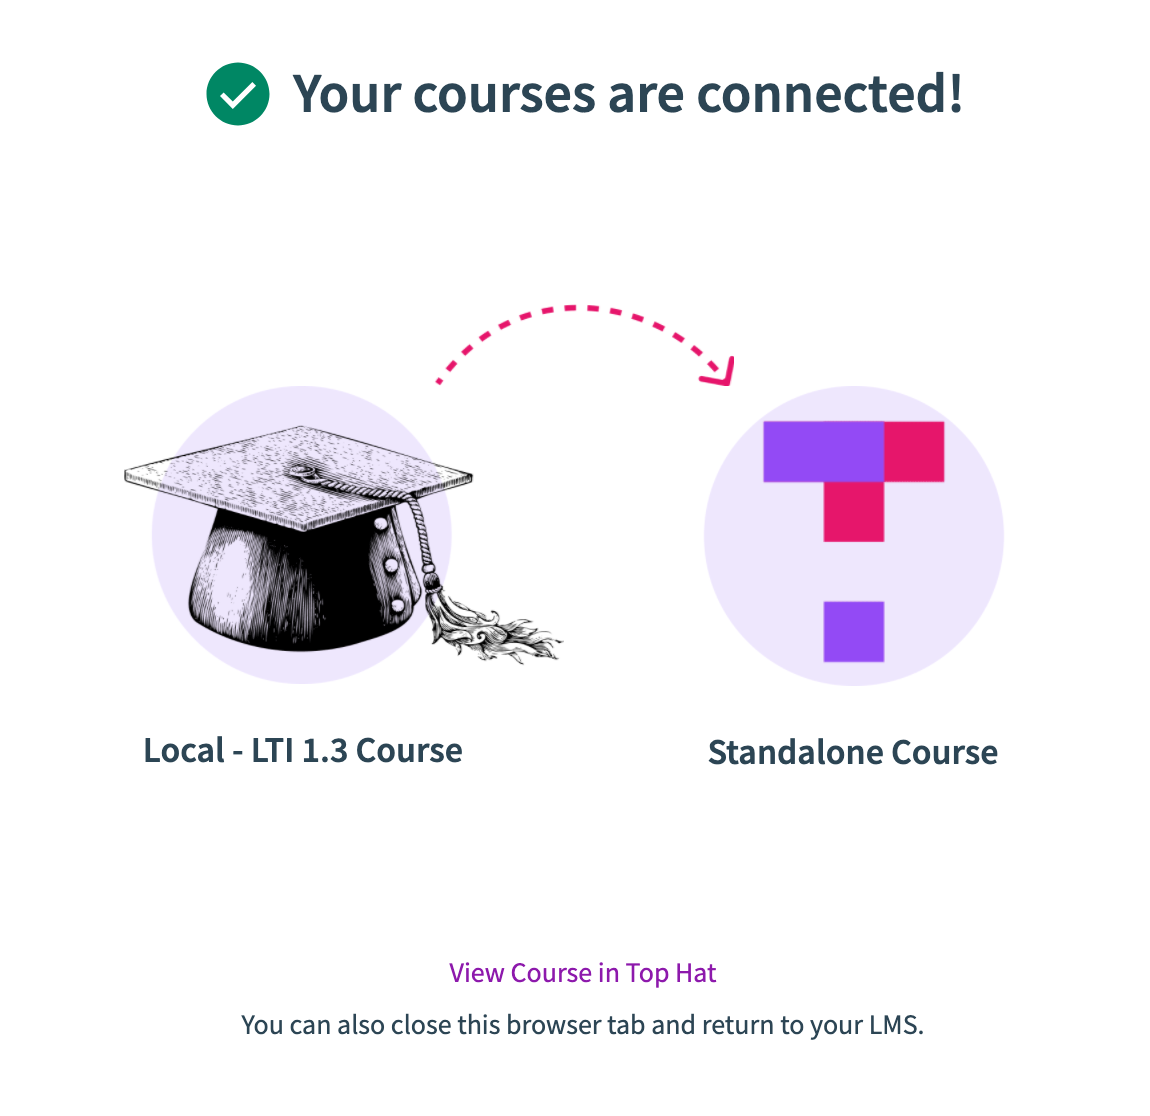 Top Hat Success message says "Your Courses Are Connected"